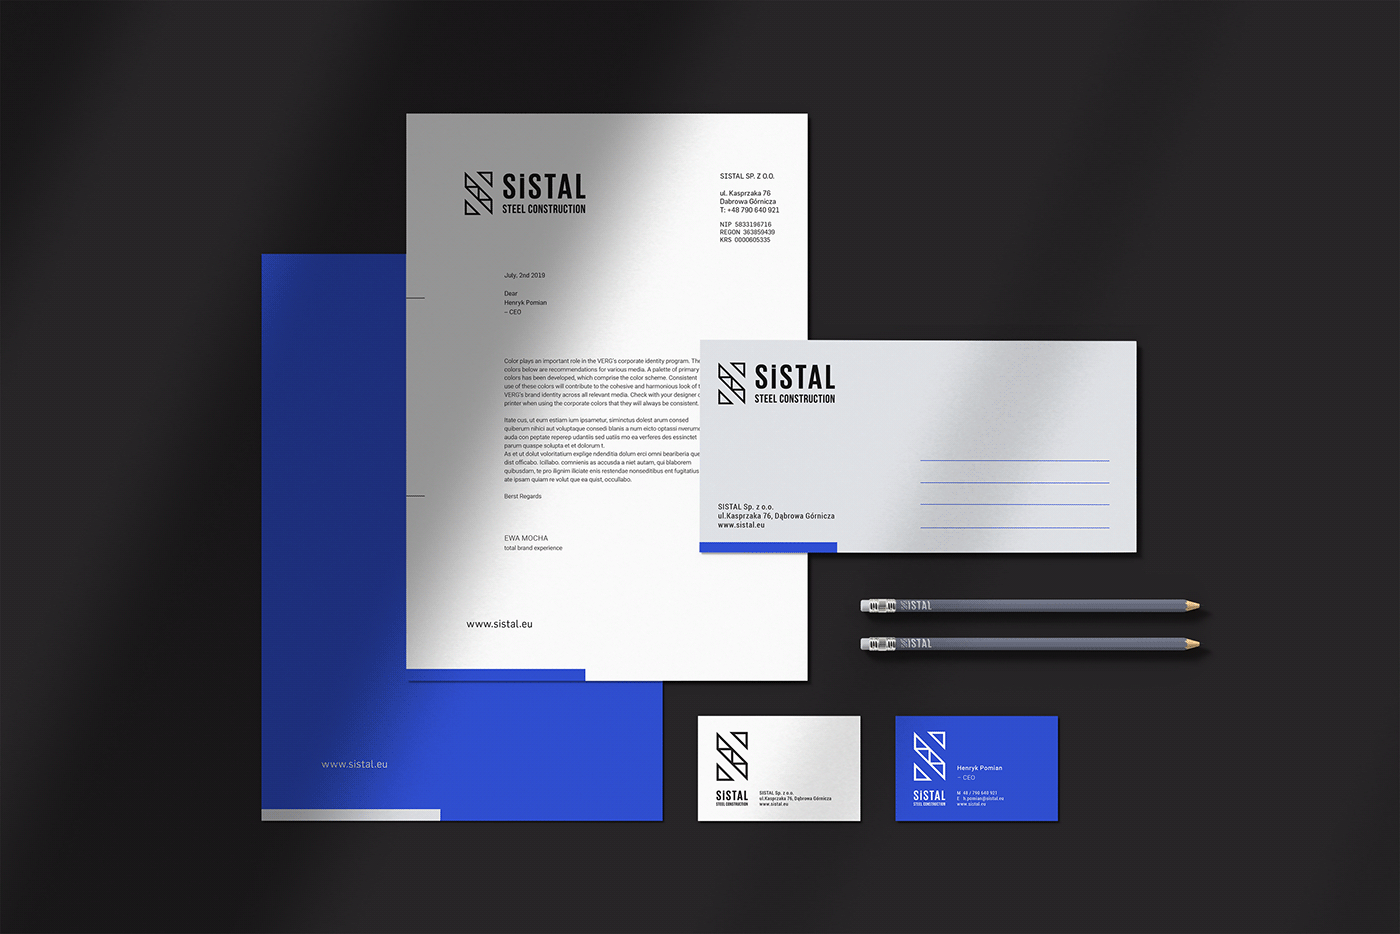 The approved layouts with the primary elements of the SiSTAL stationery system.